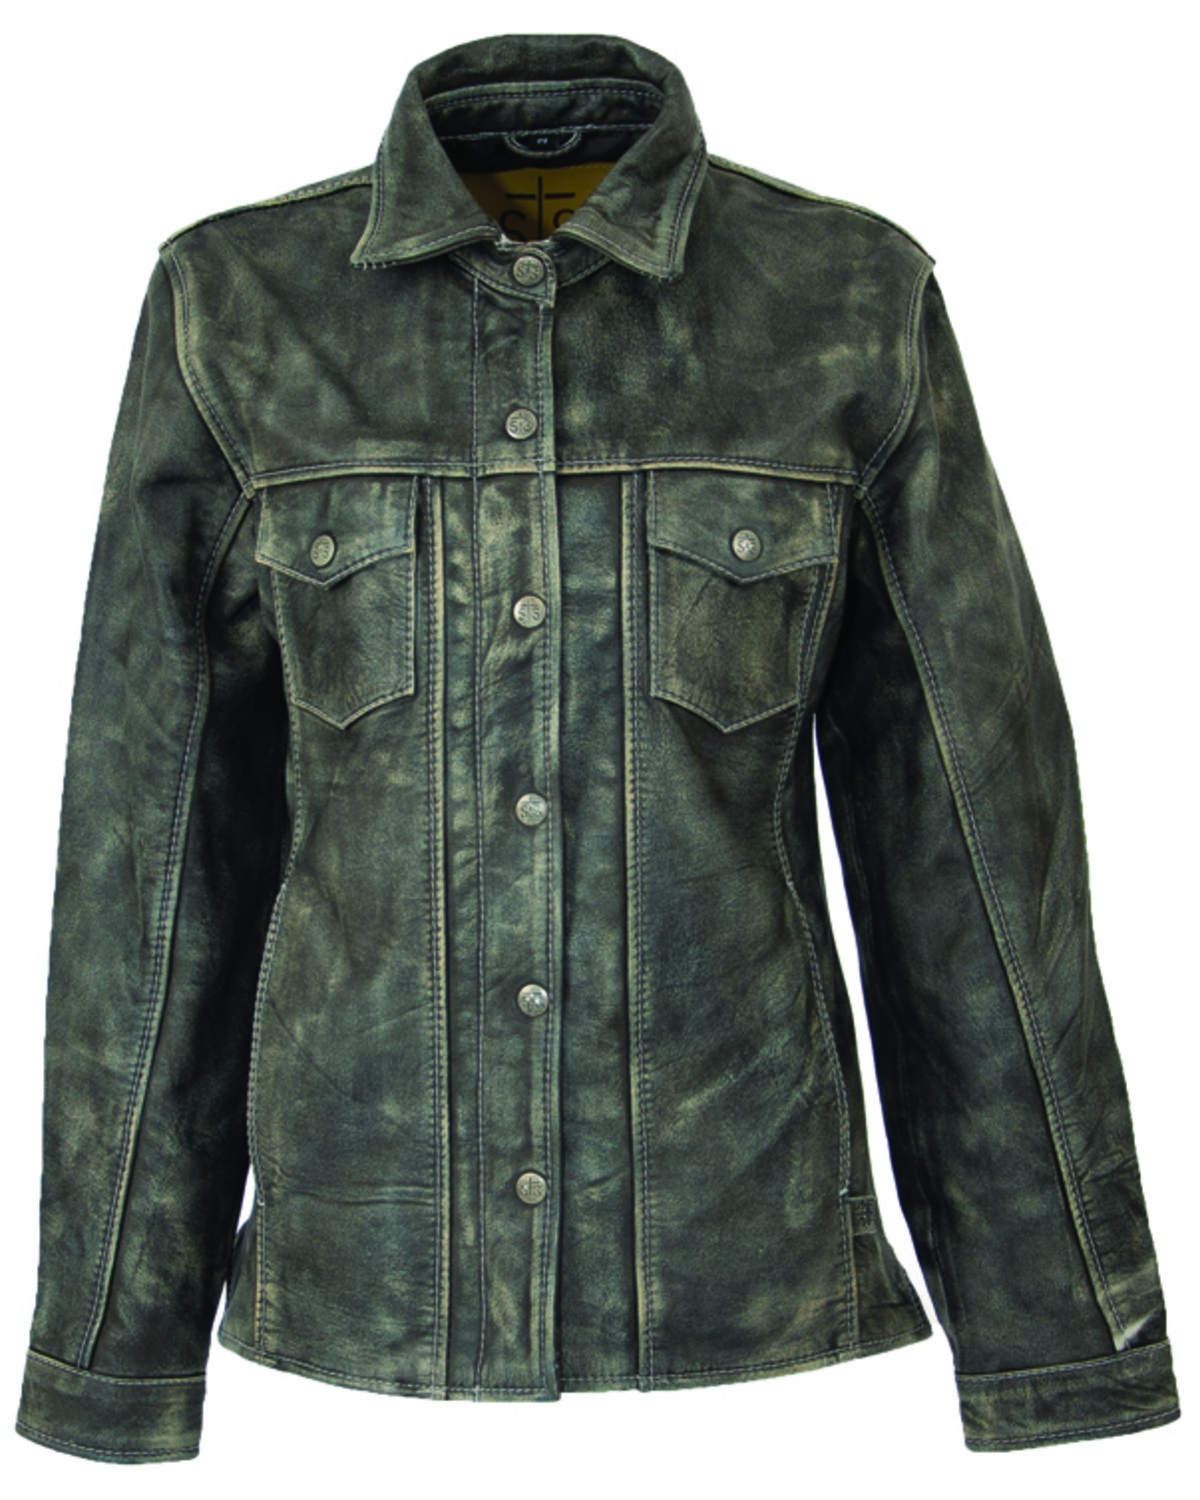 STS Ranchwear Women's Ranch Hand Leather Jacket